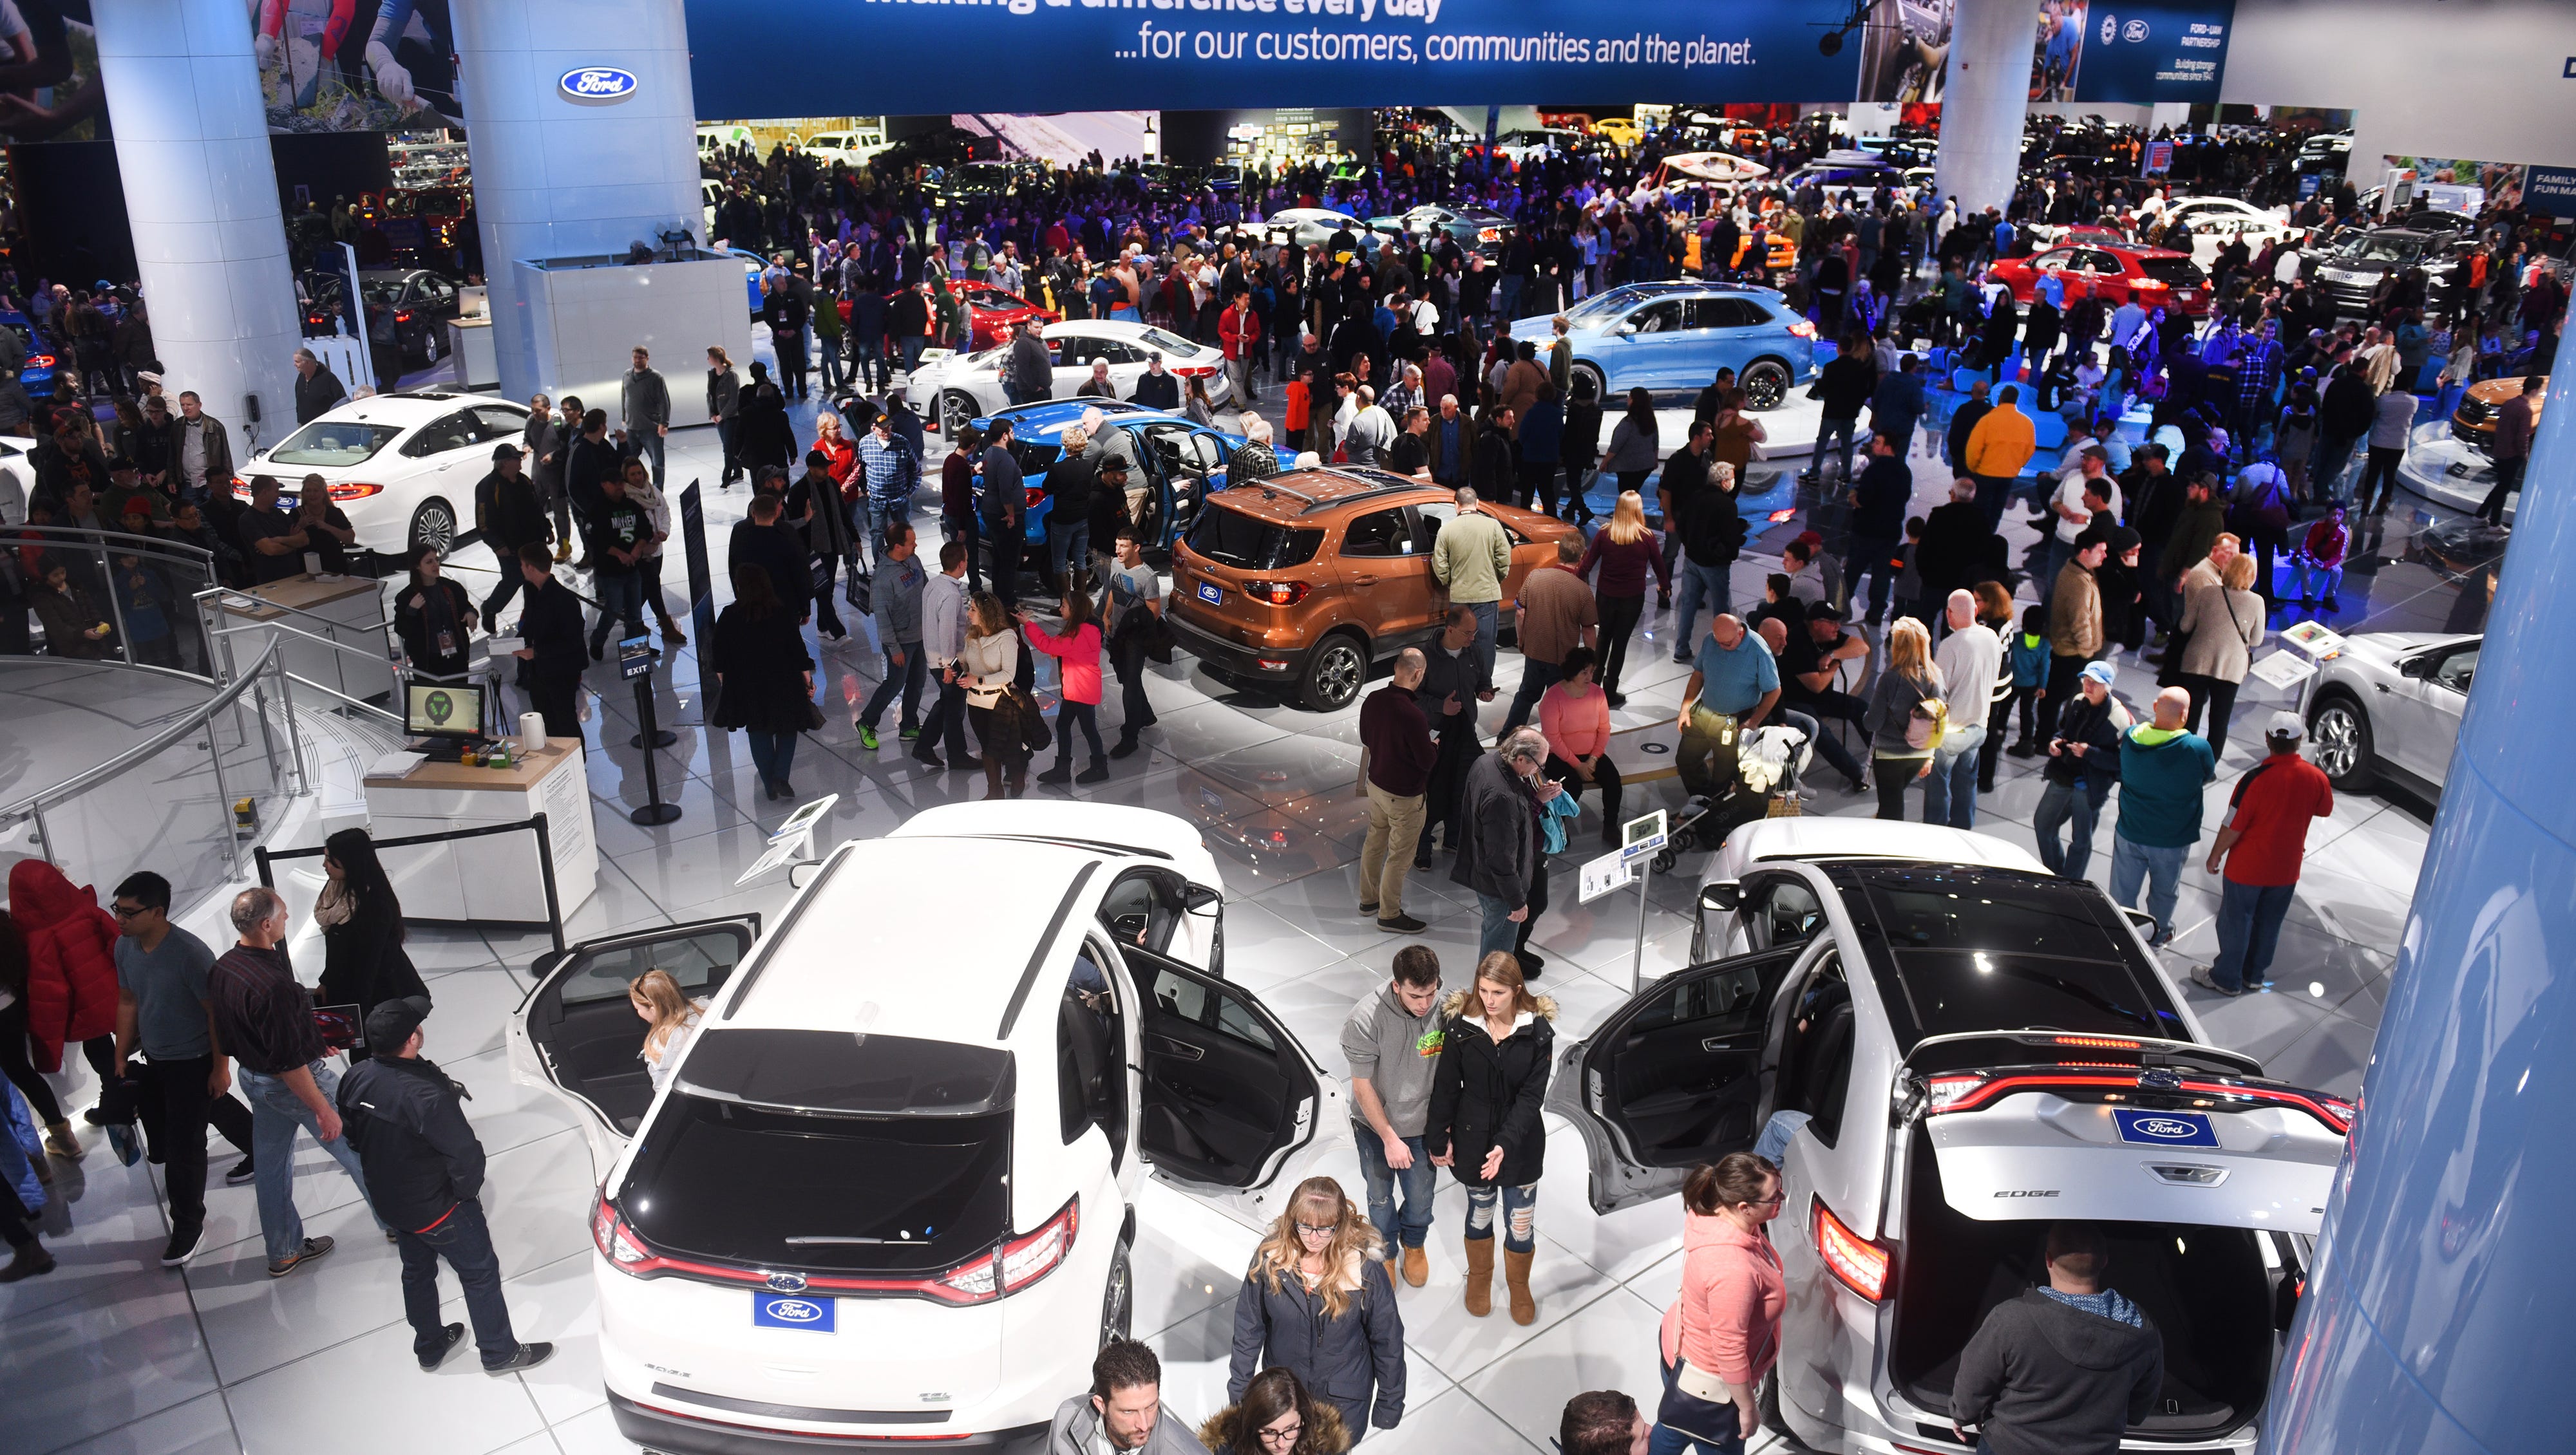 People look at the many Ford Motor Company vehicles on display at Cobo Center on Saturday January 20, 2018 for the North American International Auto Show